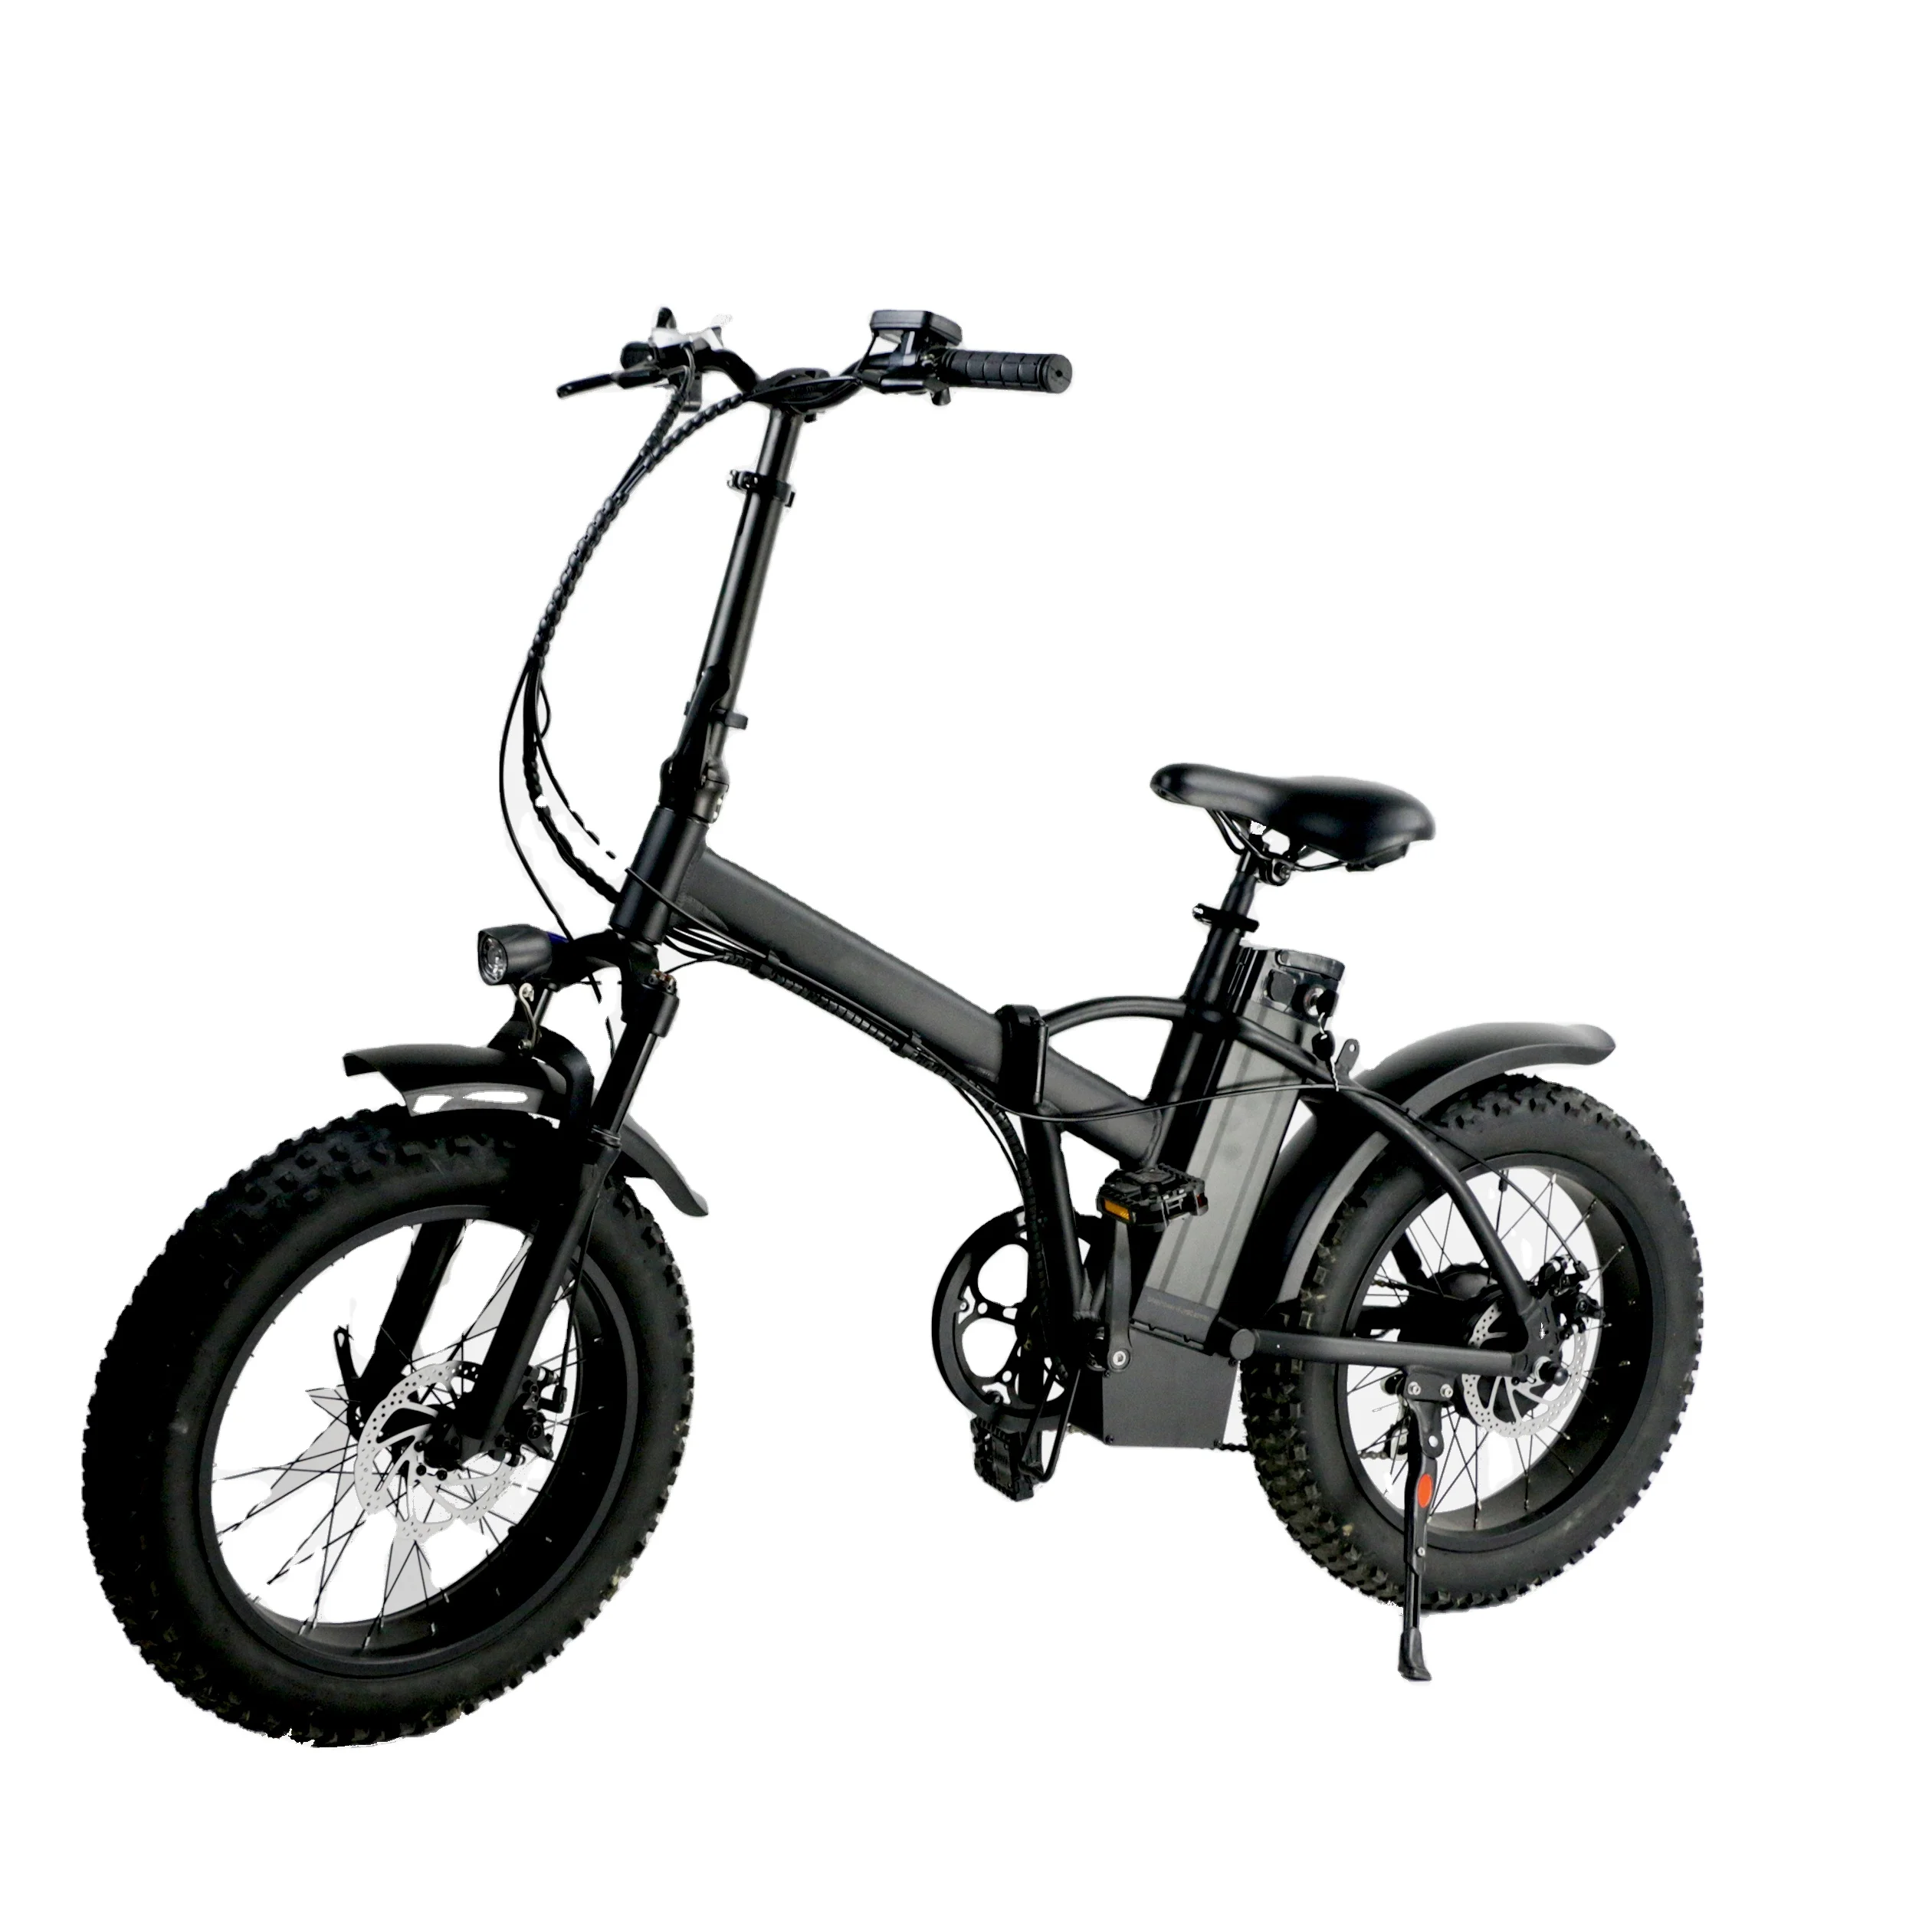 
Folding Electric Bike Electric Bicycle EBF 2 electric bicycle folding fat tire bike with 48v 500w for sale  (1600178612408)